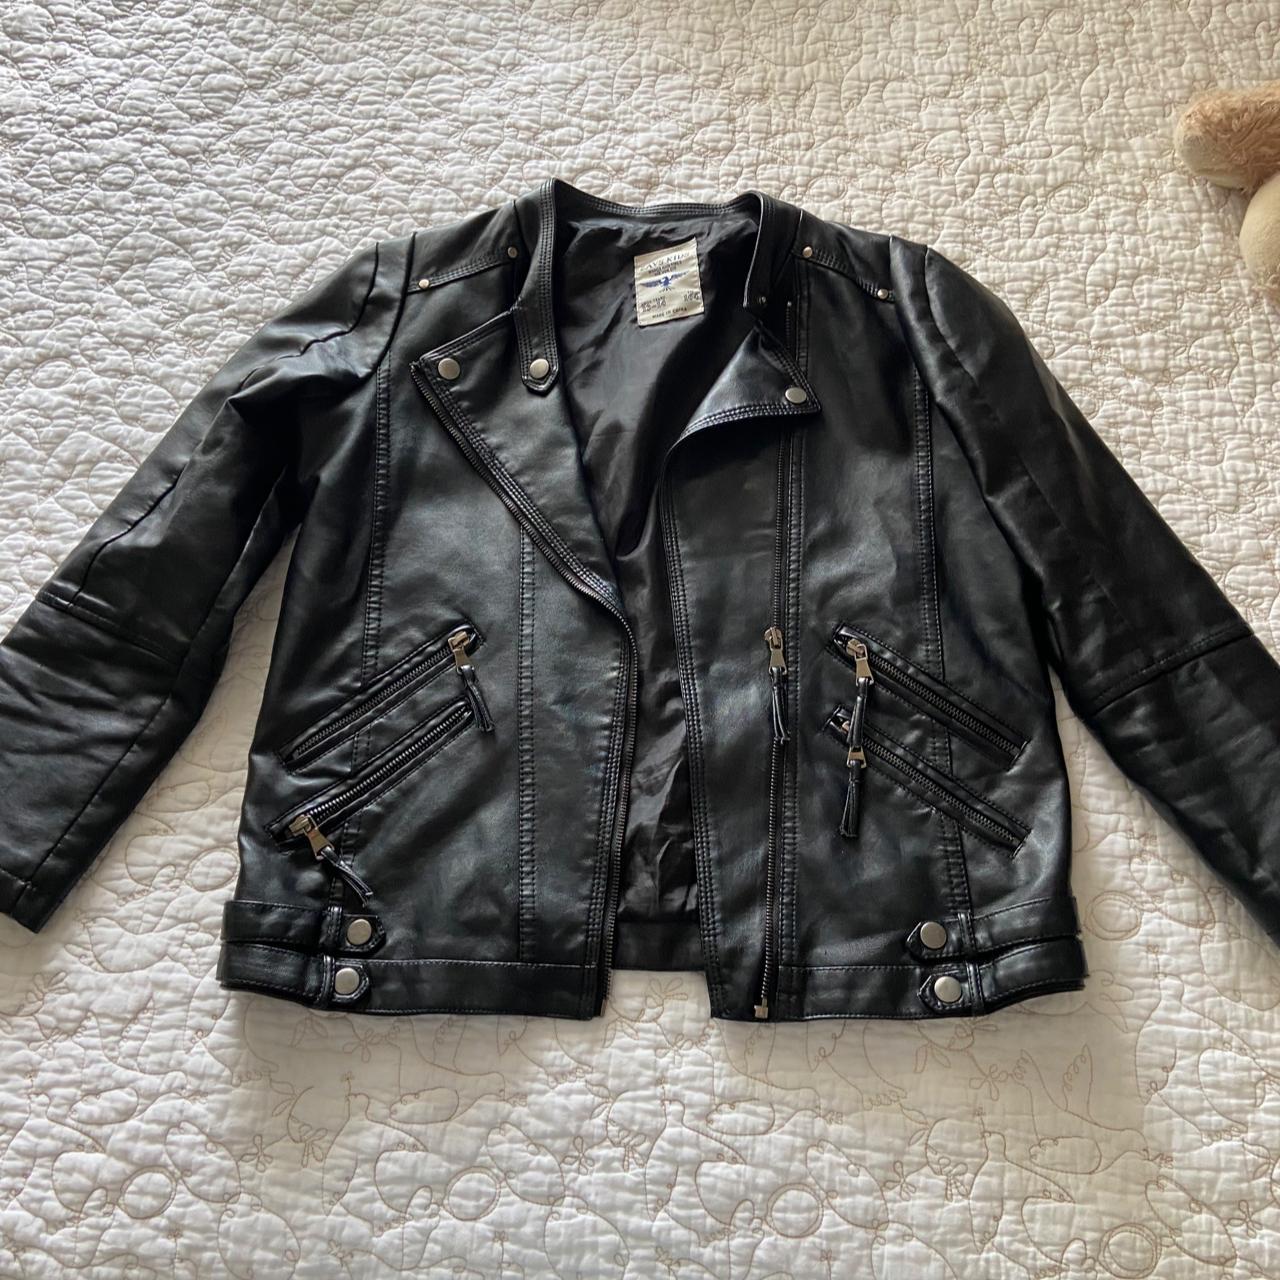 leather jacket has lots of cool straps and... - Depop